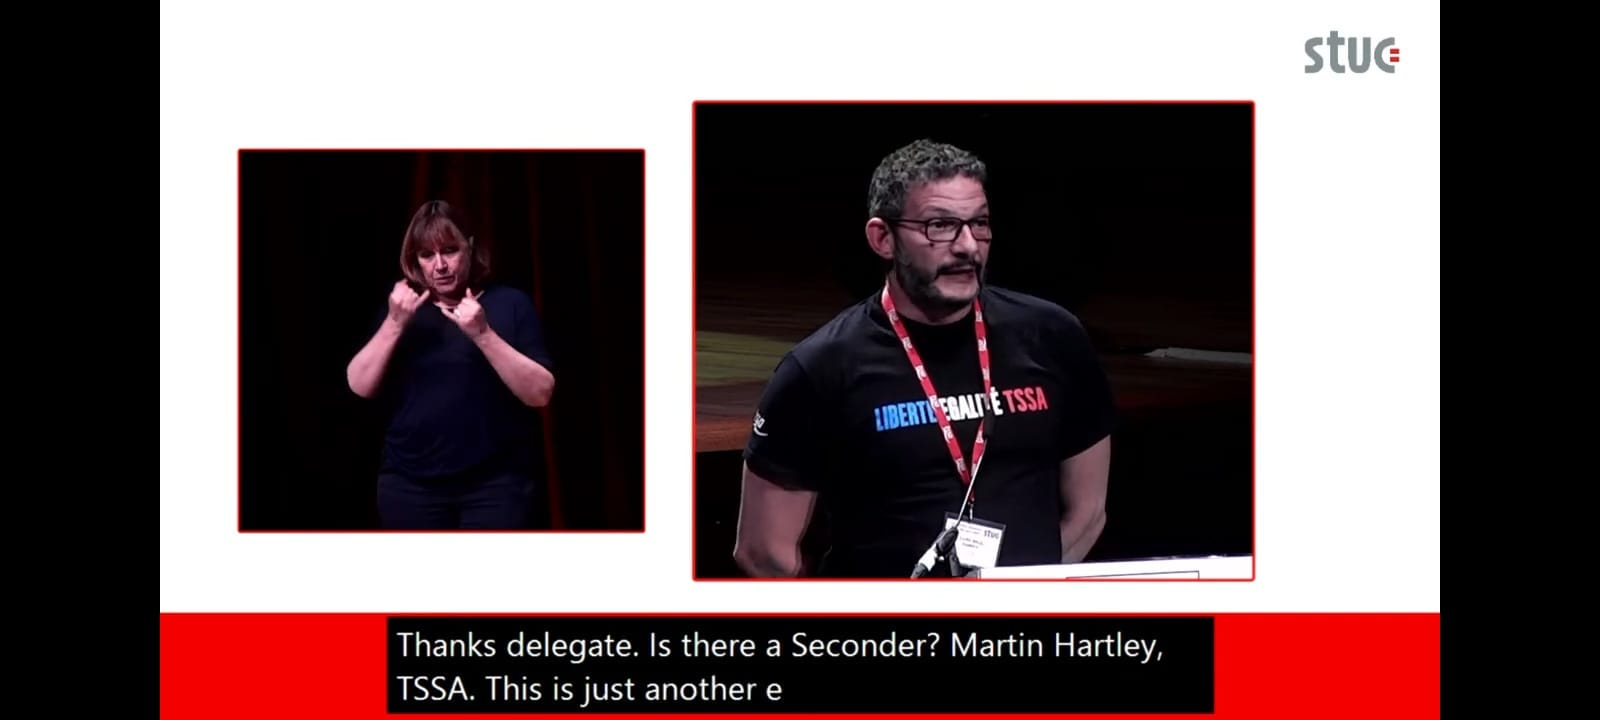 A screen showing two pictures side by side, on the left is a female sign language interpreter in a black shirt. On the right is Martin Hartley, a black man, with a moustache. He is wearing a black shirt with the words Liberté, Egalité, TSSA .